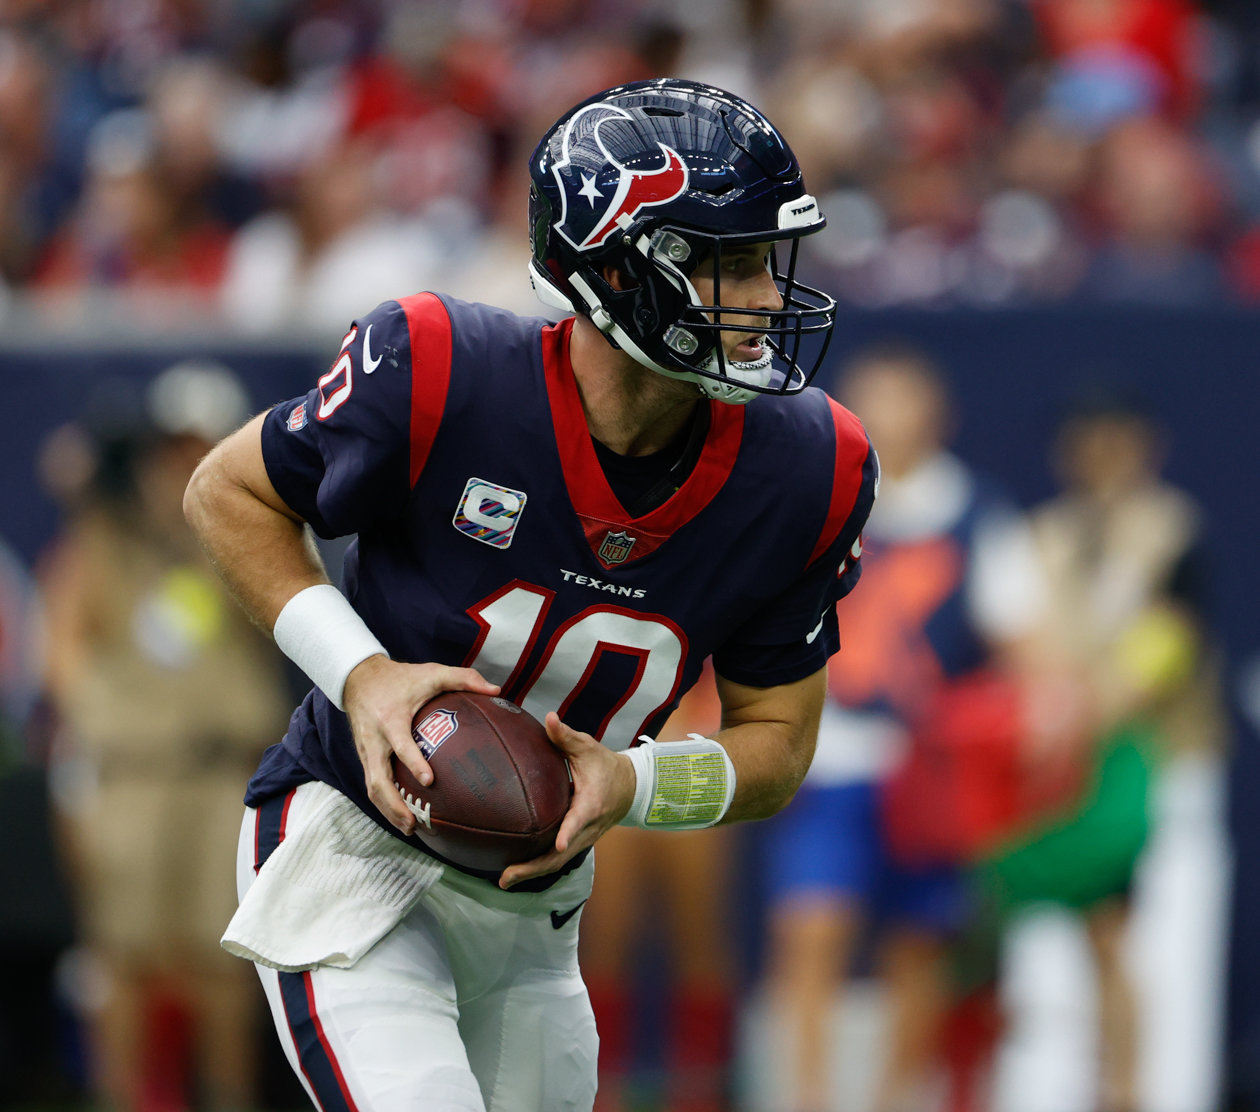 Texans quarterback Davis Mills (10) looks to hand the ball off during an NFL game between the Texans and the Titans on Oct. 30, 2022 in Houston.